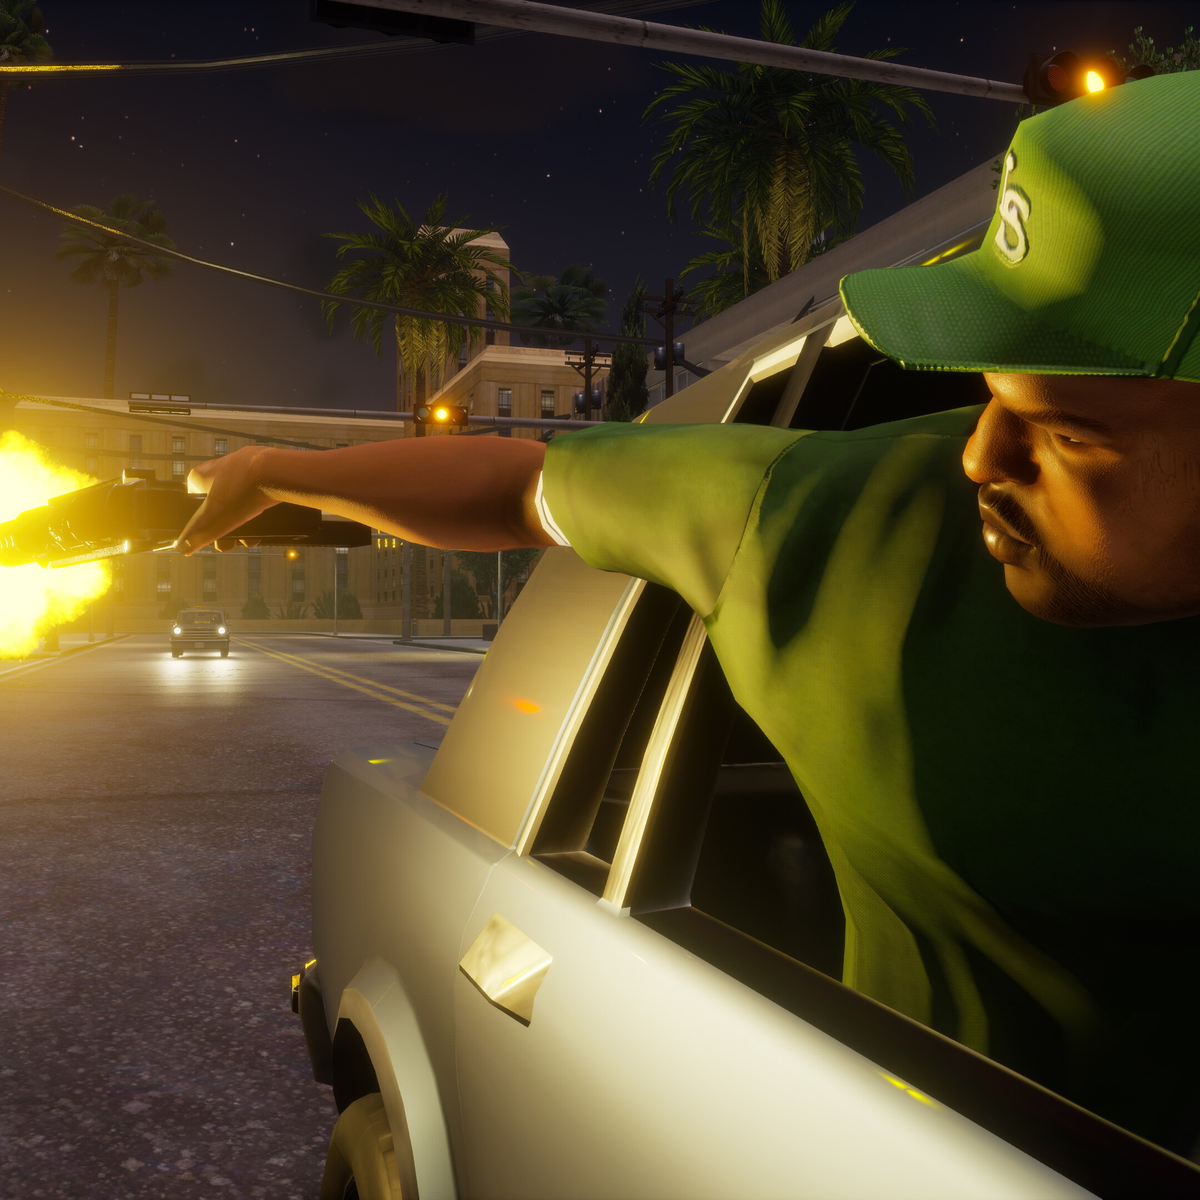 Meta staying quiet on status of Grand Theft Auto: San Andreas VR